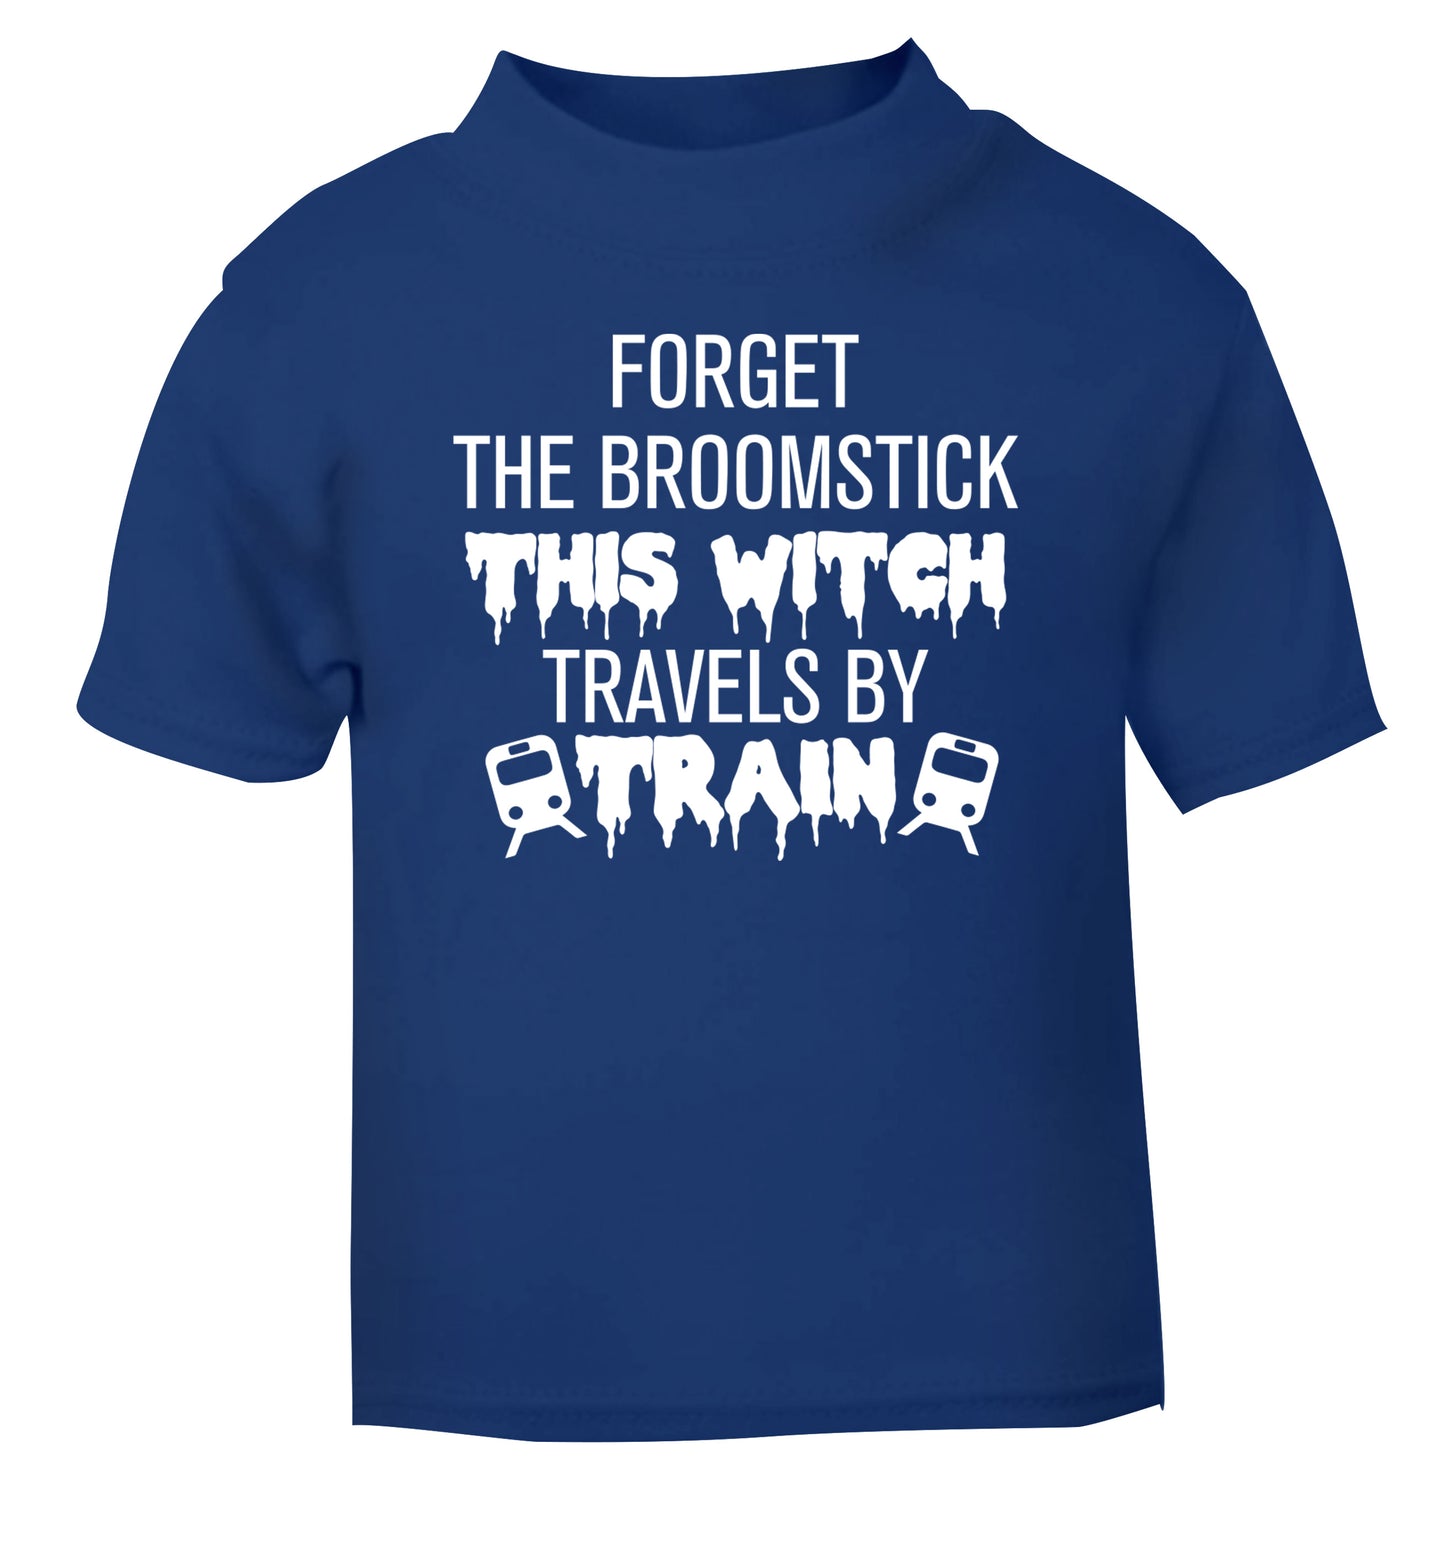 Forget the broomstick this witch travels by train blue Baby Toddler Tshirt 2 Years